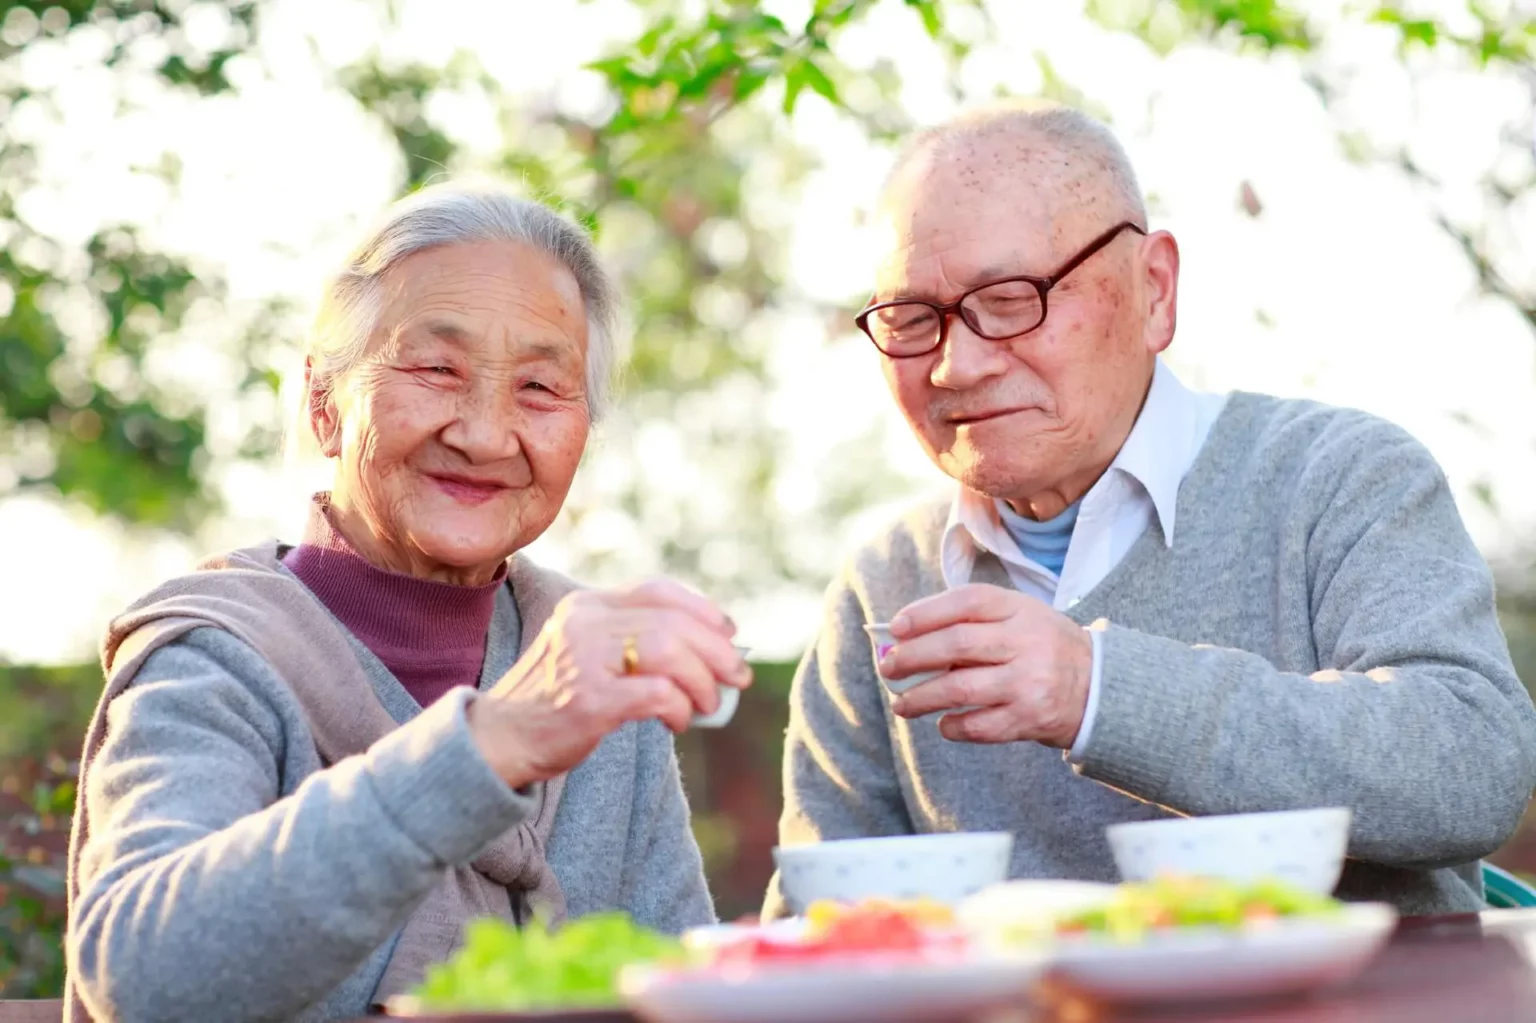 10-percent-of-japanese-are-older-than-80-for-the-first-time-government-data